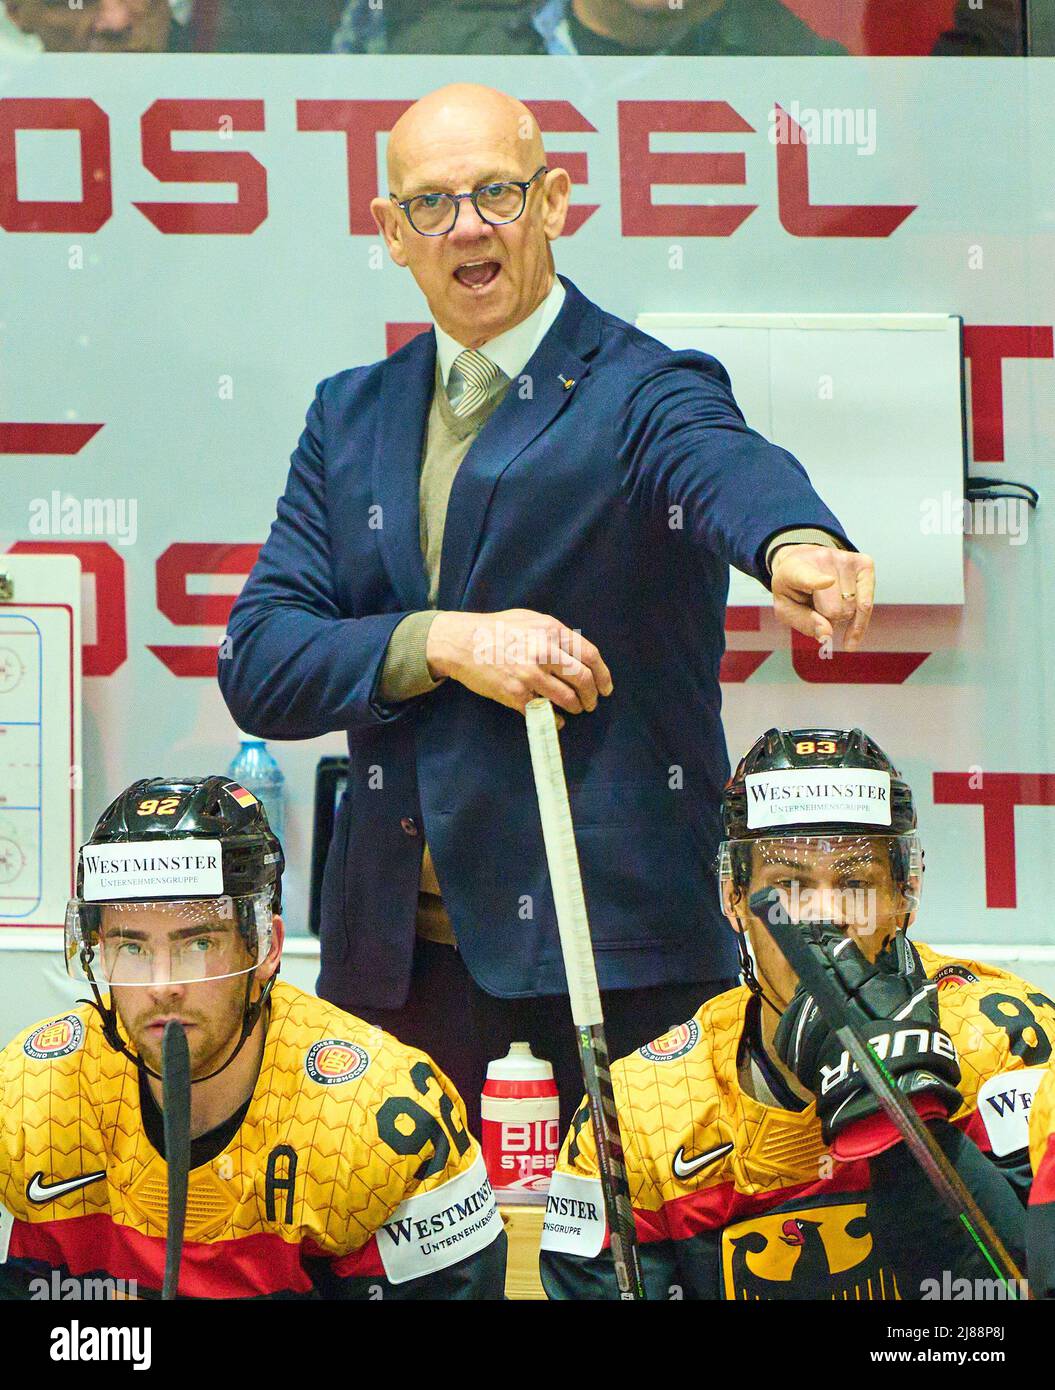 Helsinki, Finland. 13th May, 2022. Tom Rowe (65, Cheftrainer Nürnberg  Icetigers), assistent coach of Germany, in the match GERMANY - CANADA 3-5  IIHF ICE HOCKEY WORLD CHAMPIONSHIP Group B in Helsinki, Finland,